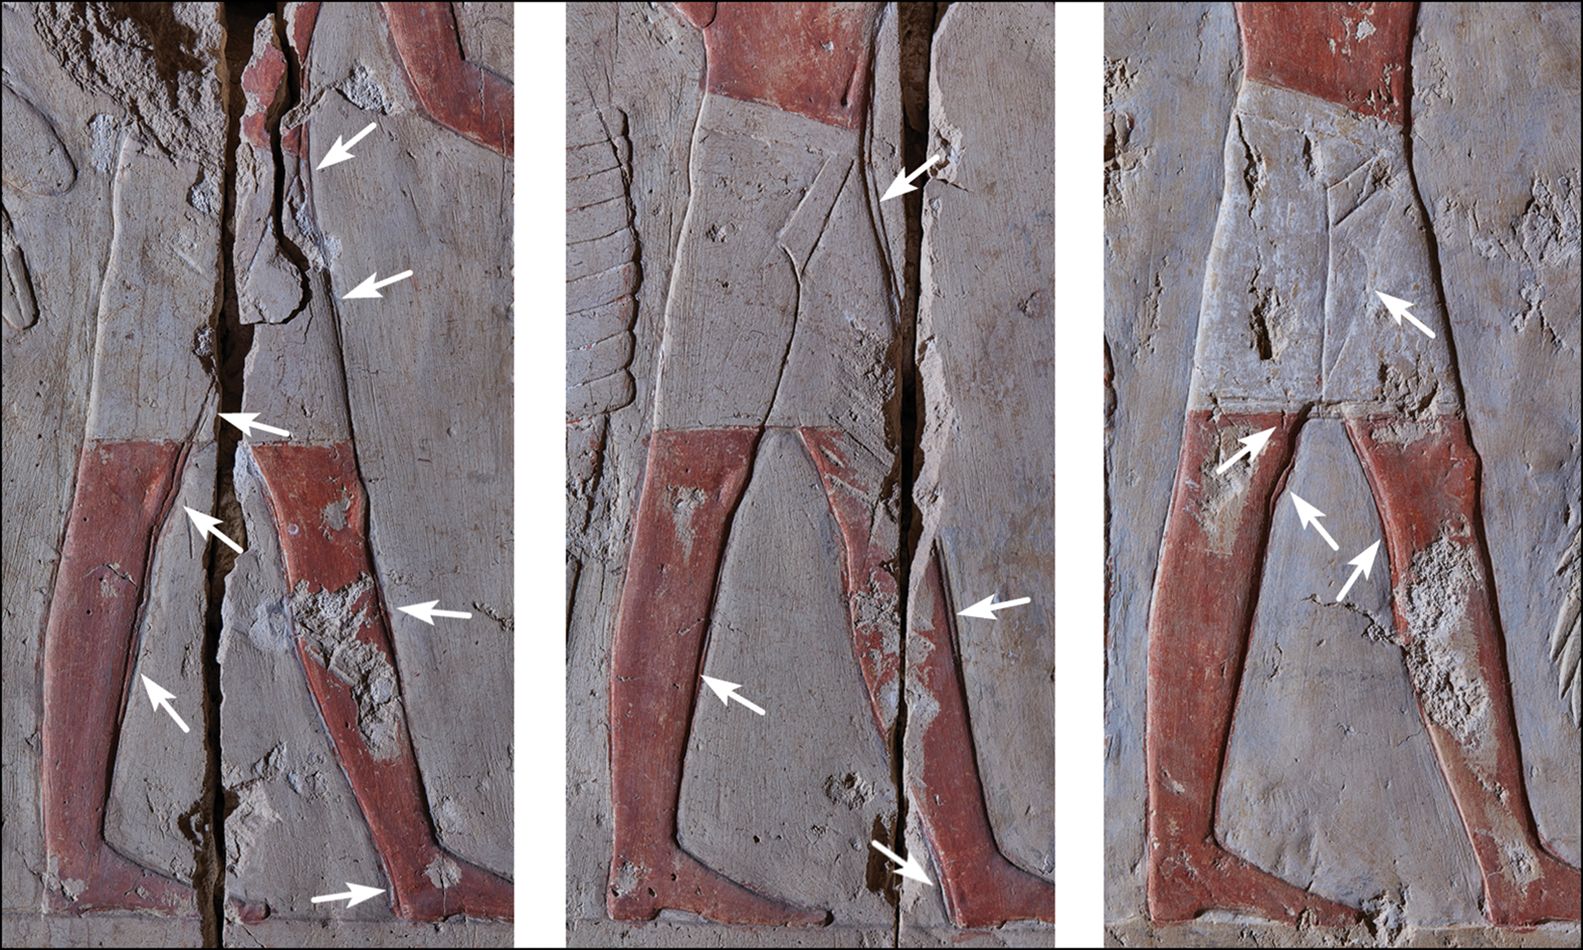 Examples of corrections done on the finished relief by more experienced artisans (indicated with arrows). Credit: Anastasiia Stupko-Lubczynska / Antiquity, 2021